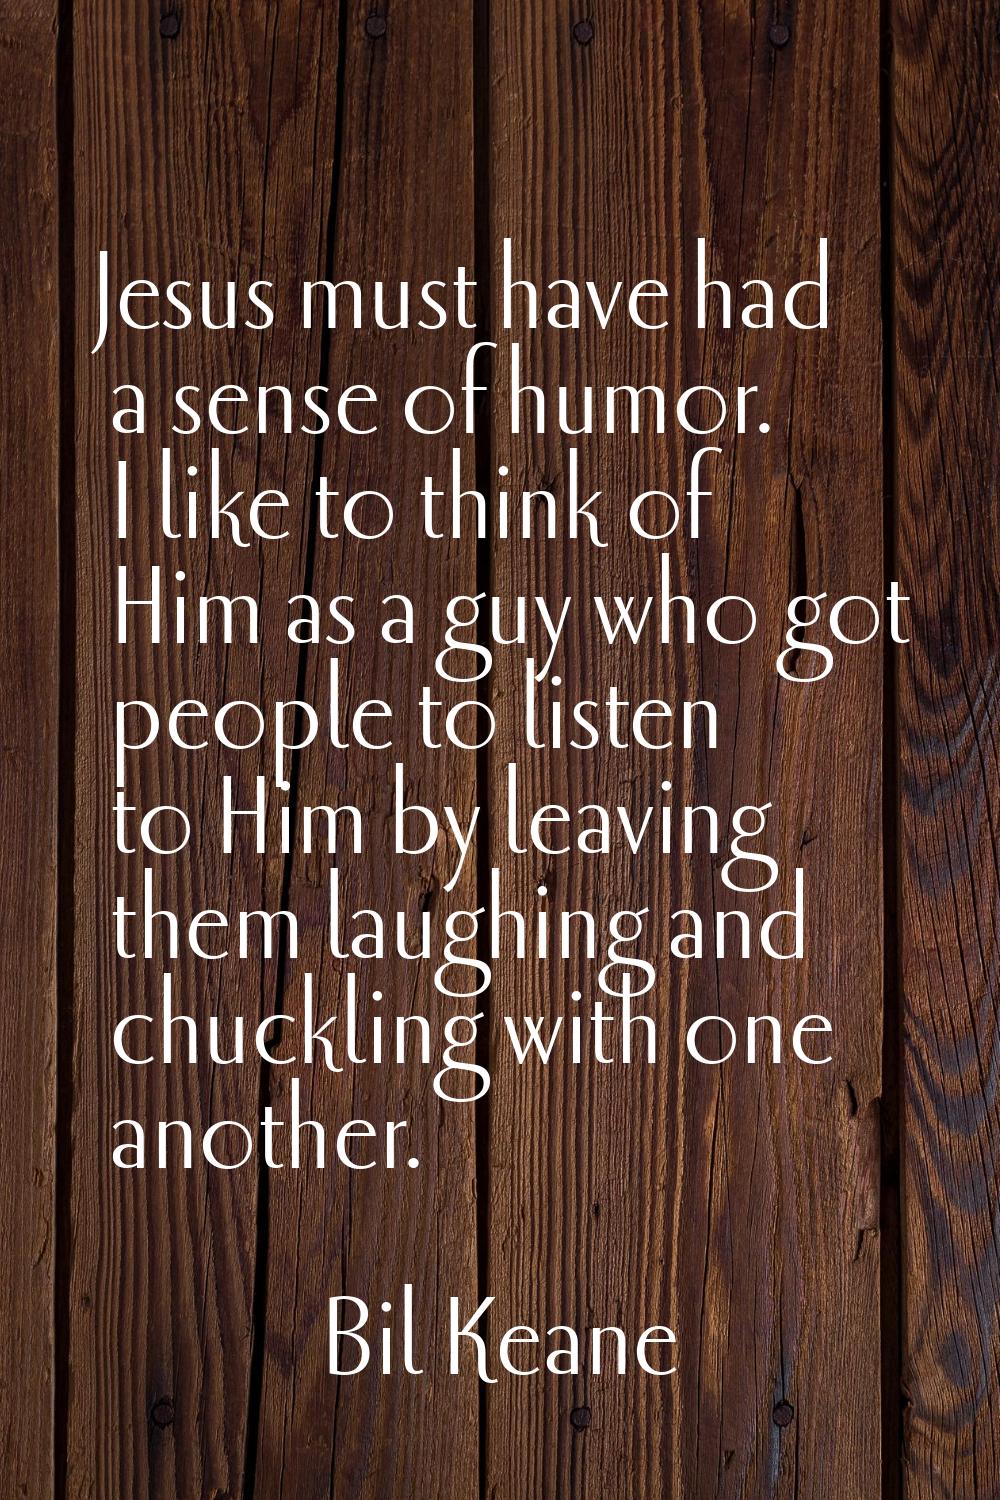 Jesus must have had a sense of humor. I like to think of Him as a guy who got people to listen to H